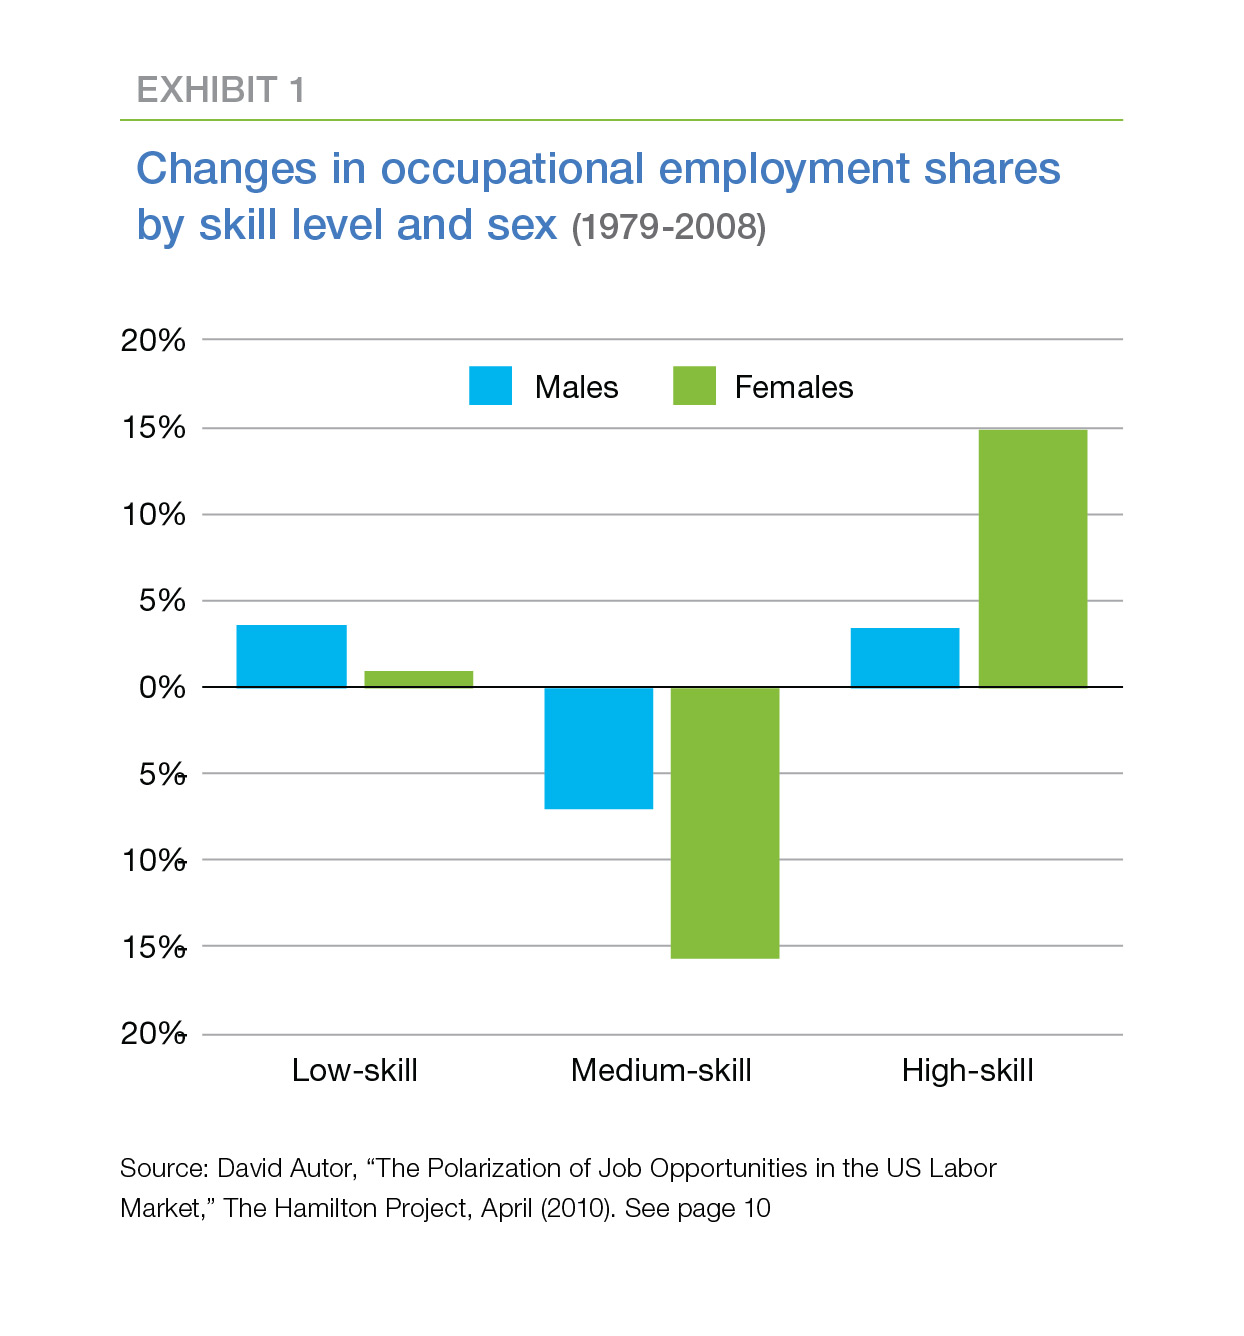 Color bar chart showing changes in occupational employment shares by skill level and sex from 1979 to 2008